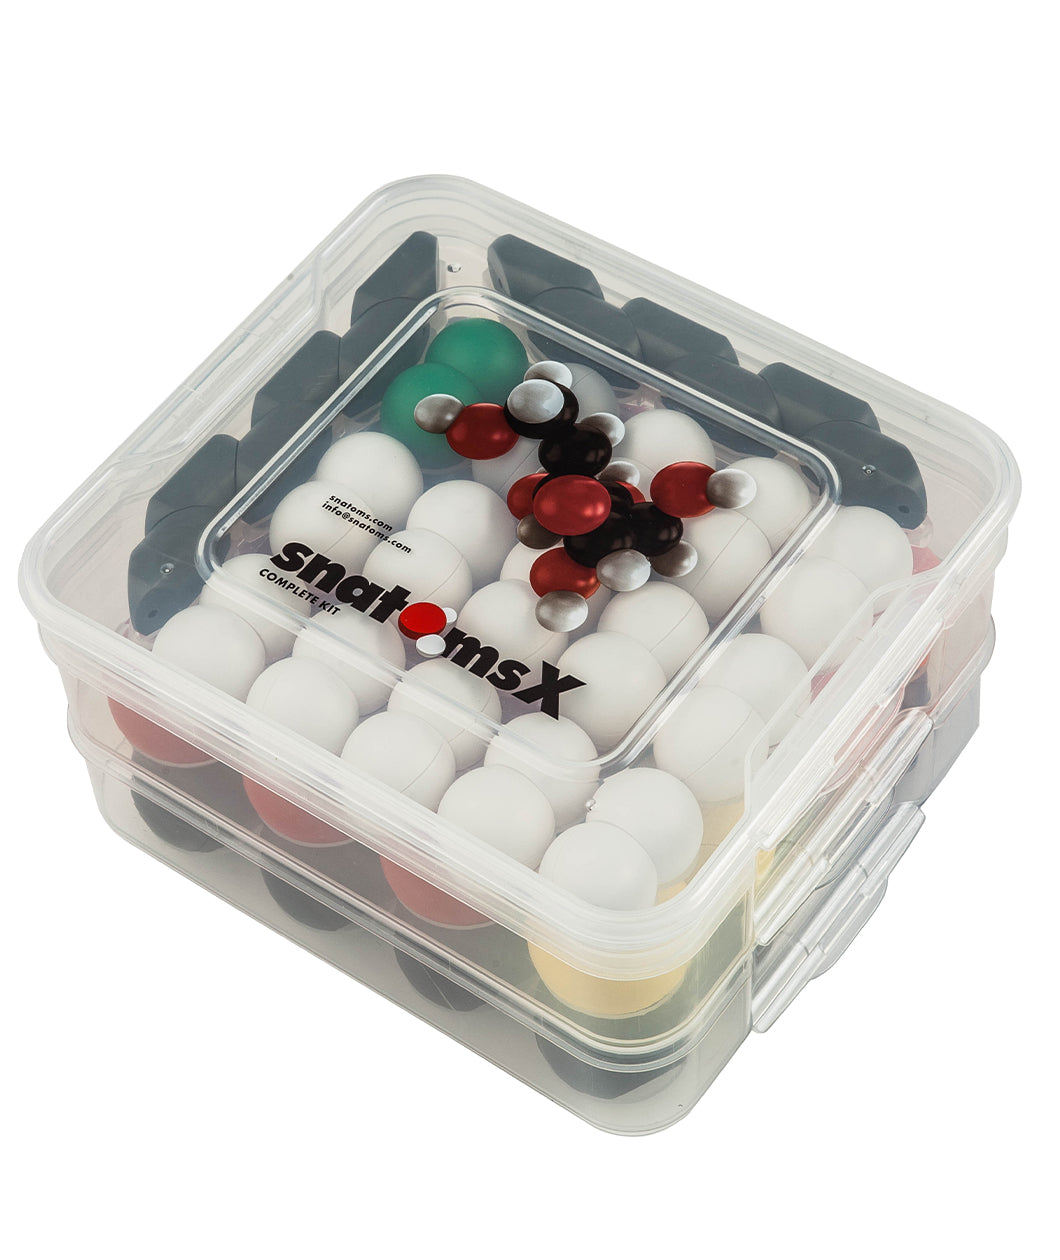 A clear, square plastic box full of various atom pieces arranged in rows. On the top of box is an image of a put-together molecule, and below that, the text "SnatomsX."